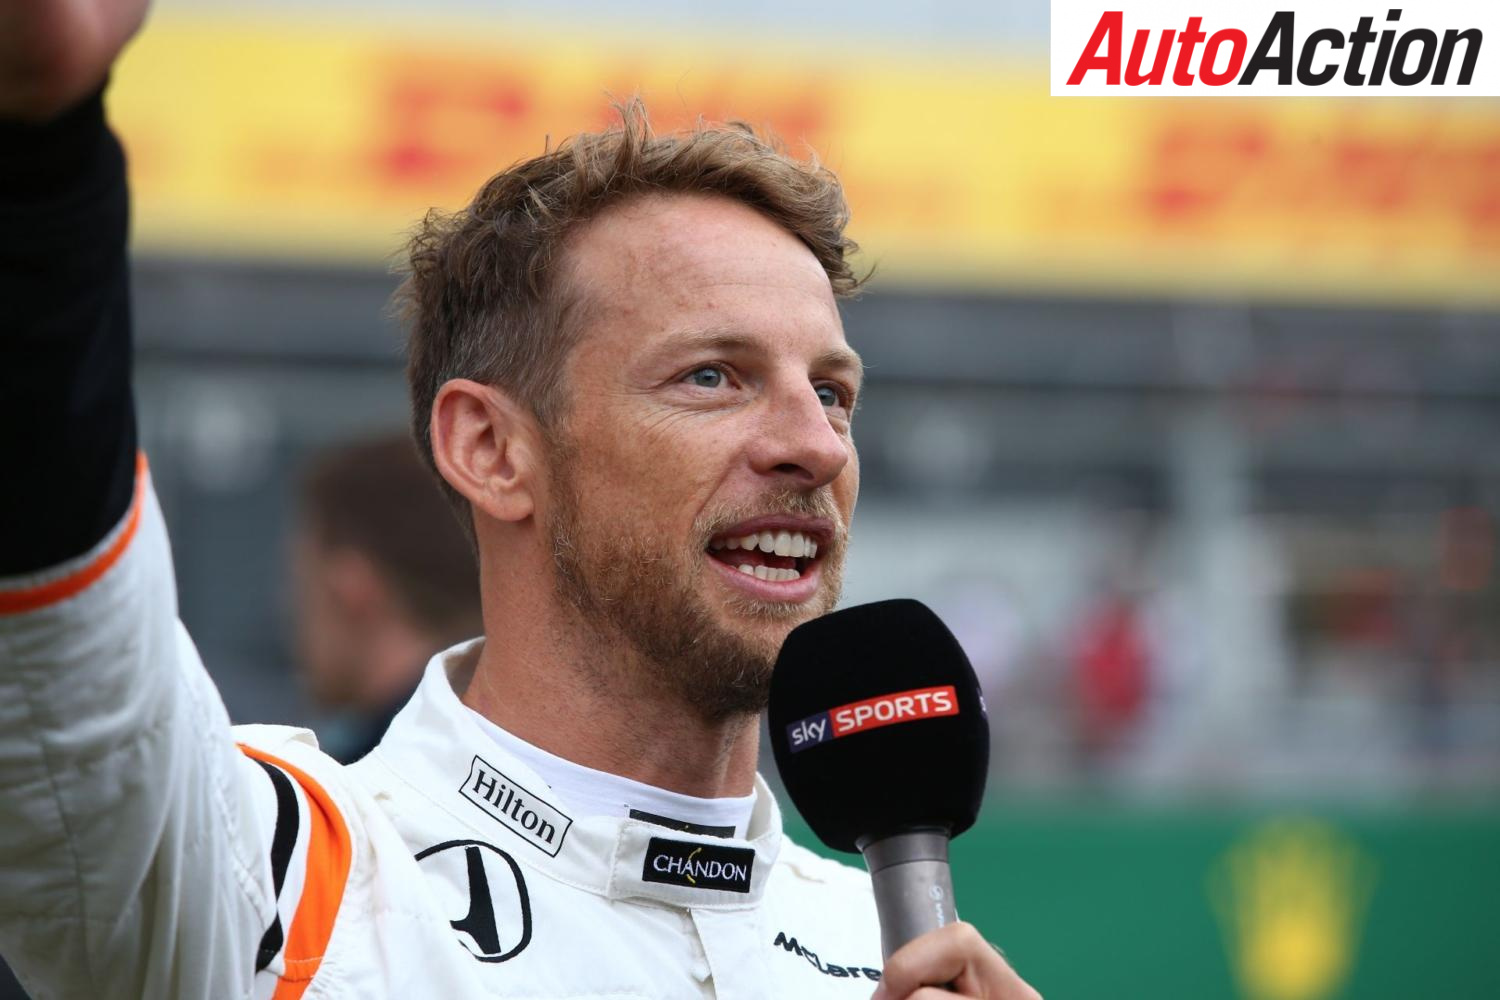 Jenson Button confirms return to full time racing in 2018 - Photo: LAT